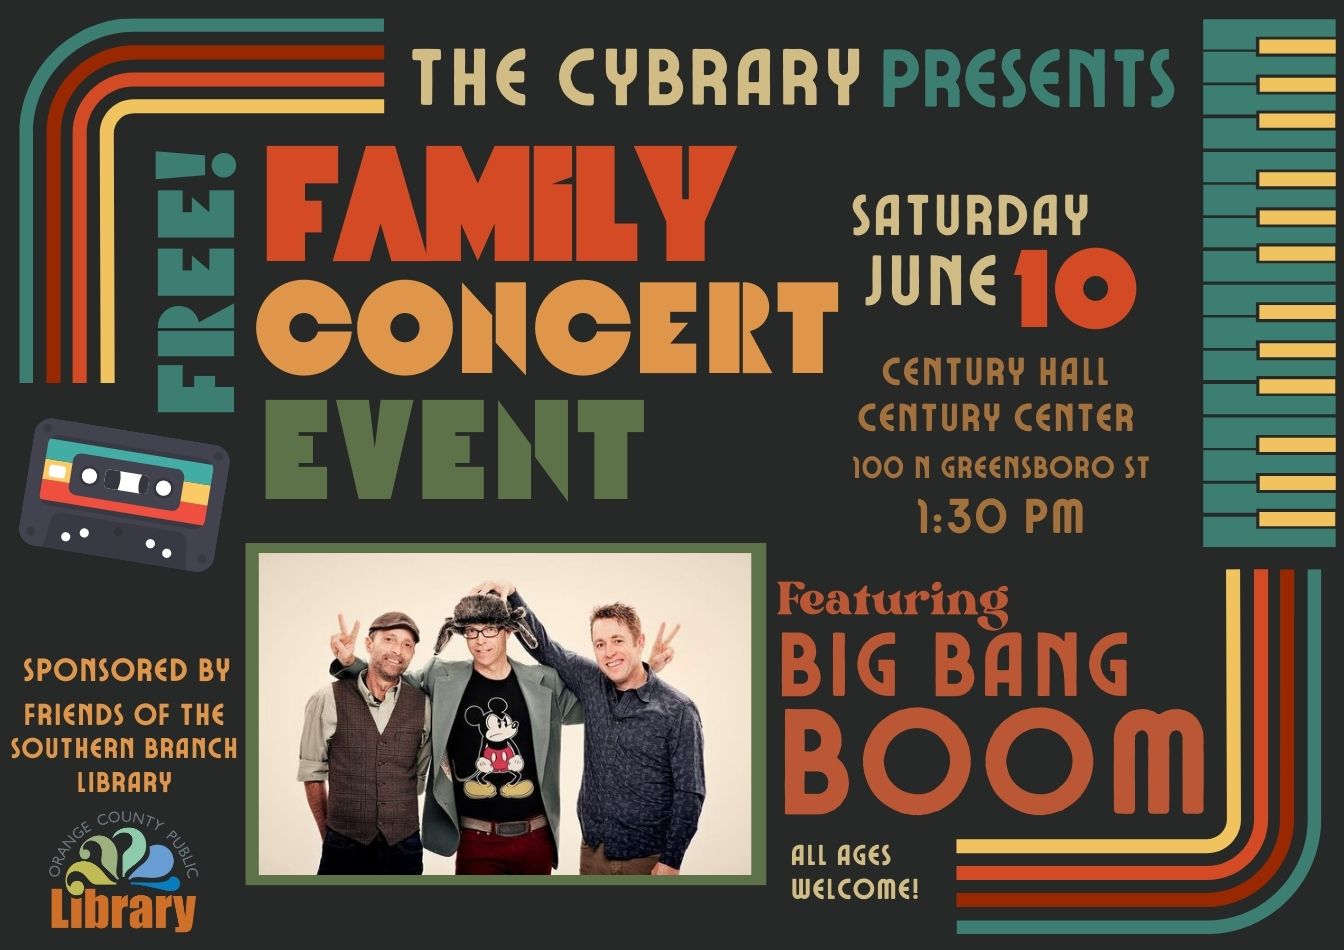 A black flyer advertising the family concert event at the Cybrary. Flyer text: The Cybrary presents: free family concert event! Featuring Big Bang Boom. All ages welcome! Saturday, June 10, 1:30 pm. Century Hall, Century Center, 100 North Greensboro Street, Carrboro, NC. Sponsored by friends of the Southern Branch Library.